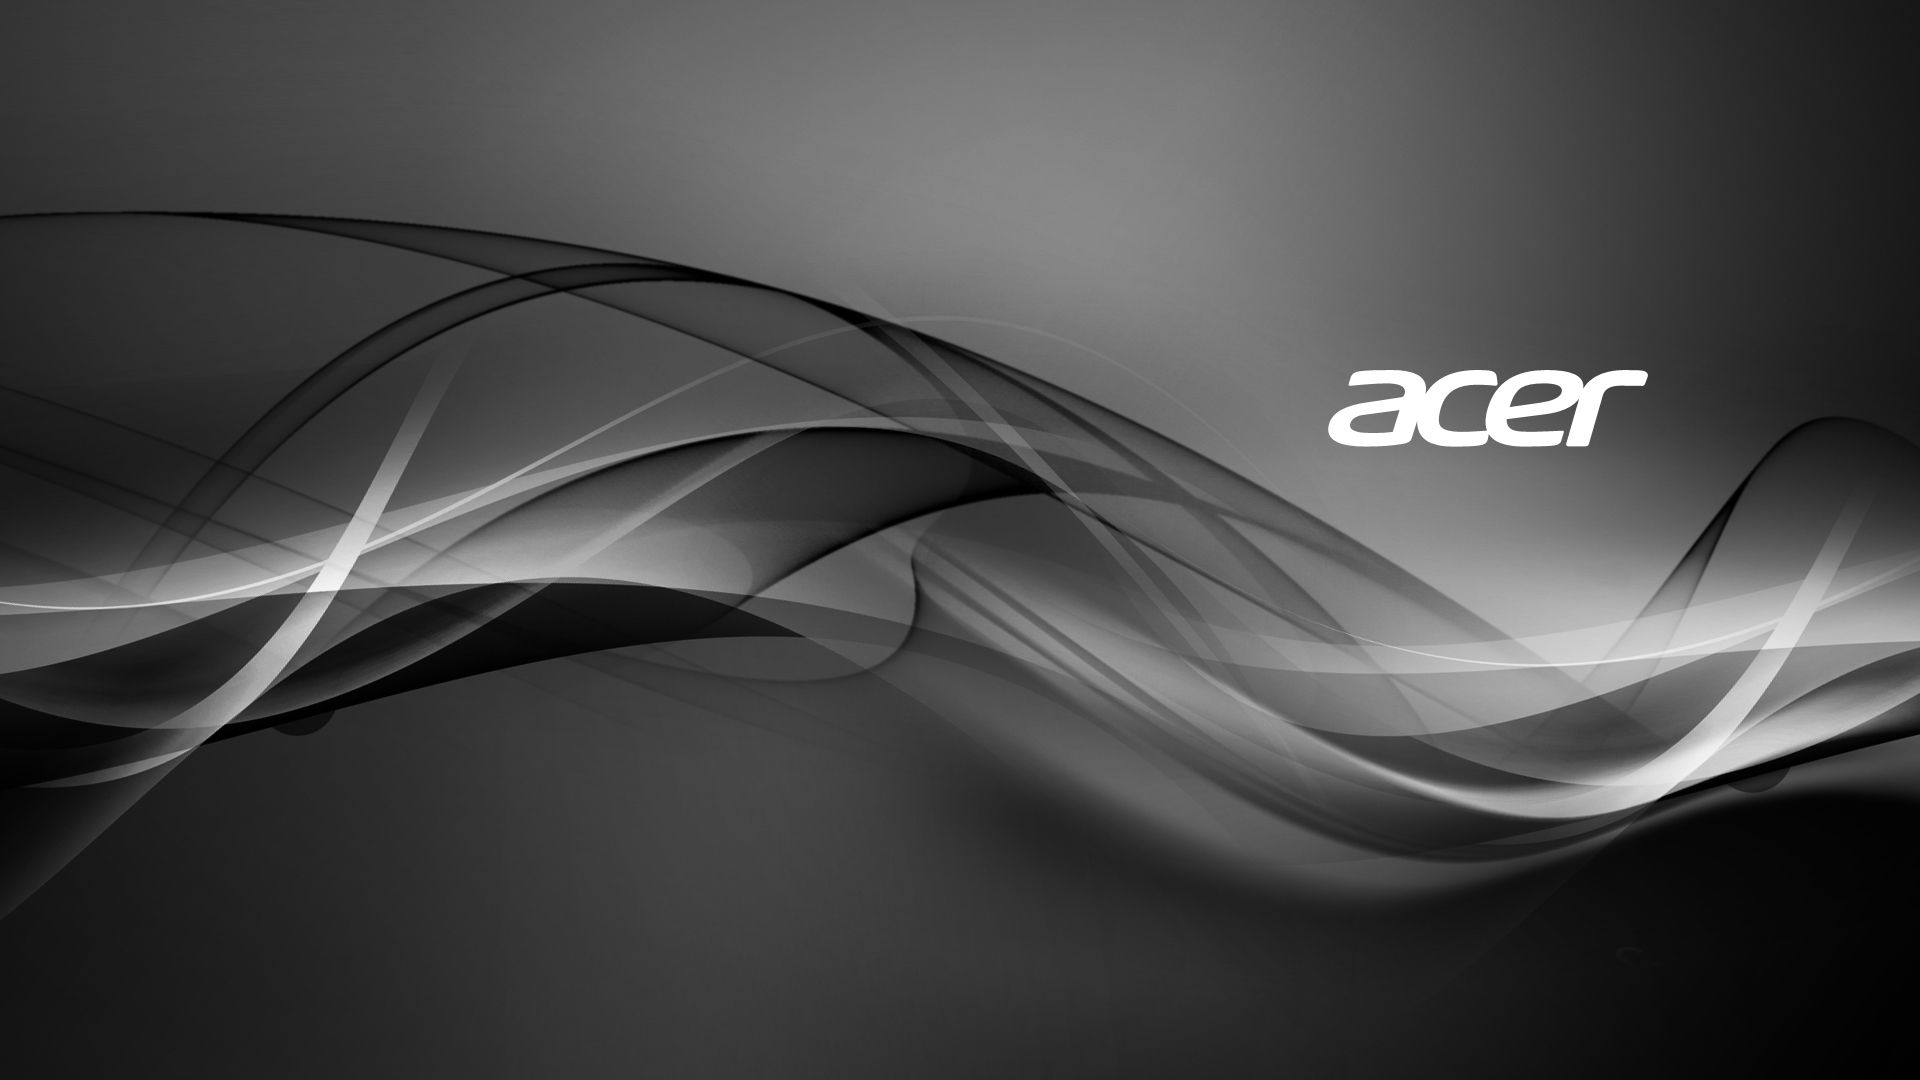 Wonderful Acer Wallpaper | Full HD Pictures